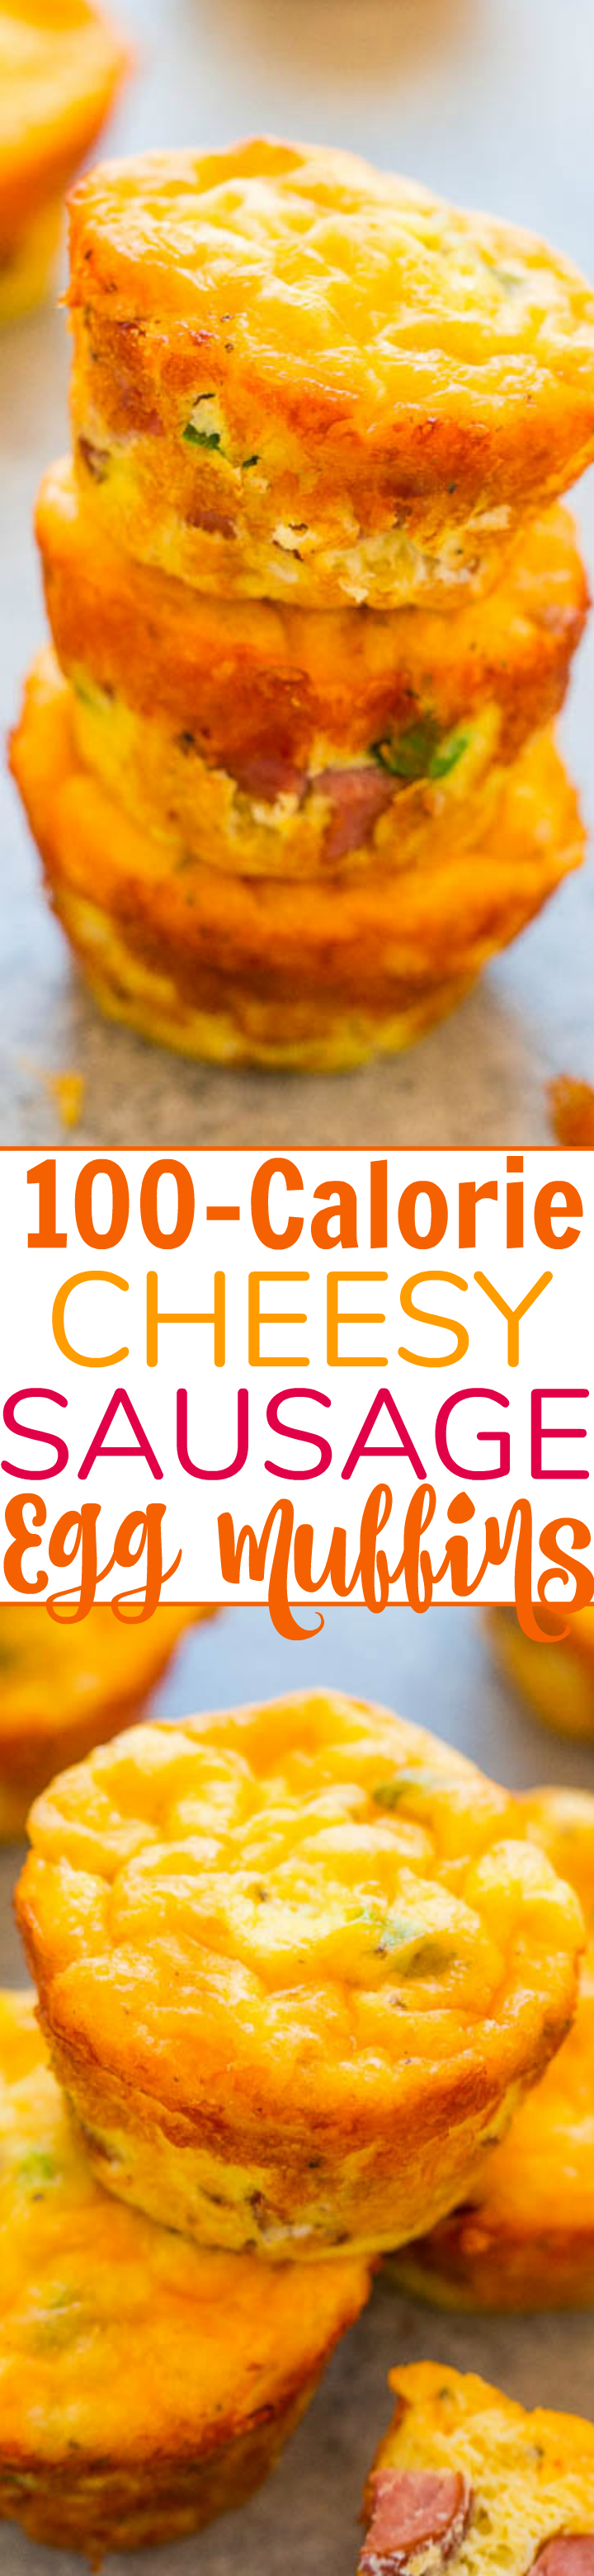 100-Calorie Cheesy Sausage Baked Egg Muffins - Low carb baked egg muffins that are loaded with juicy sausage and cheese! EASY, ready in 30 minutes, and perfect for breakfast, brunches, snacks, or breakfast-for-dinner! You'll want to keep a stash on hand!!